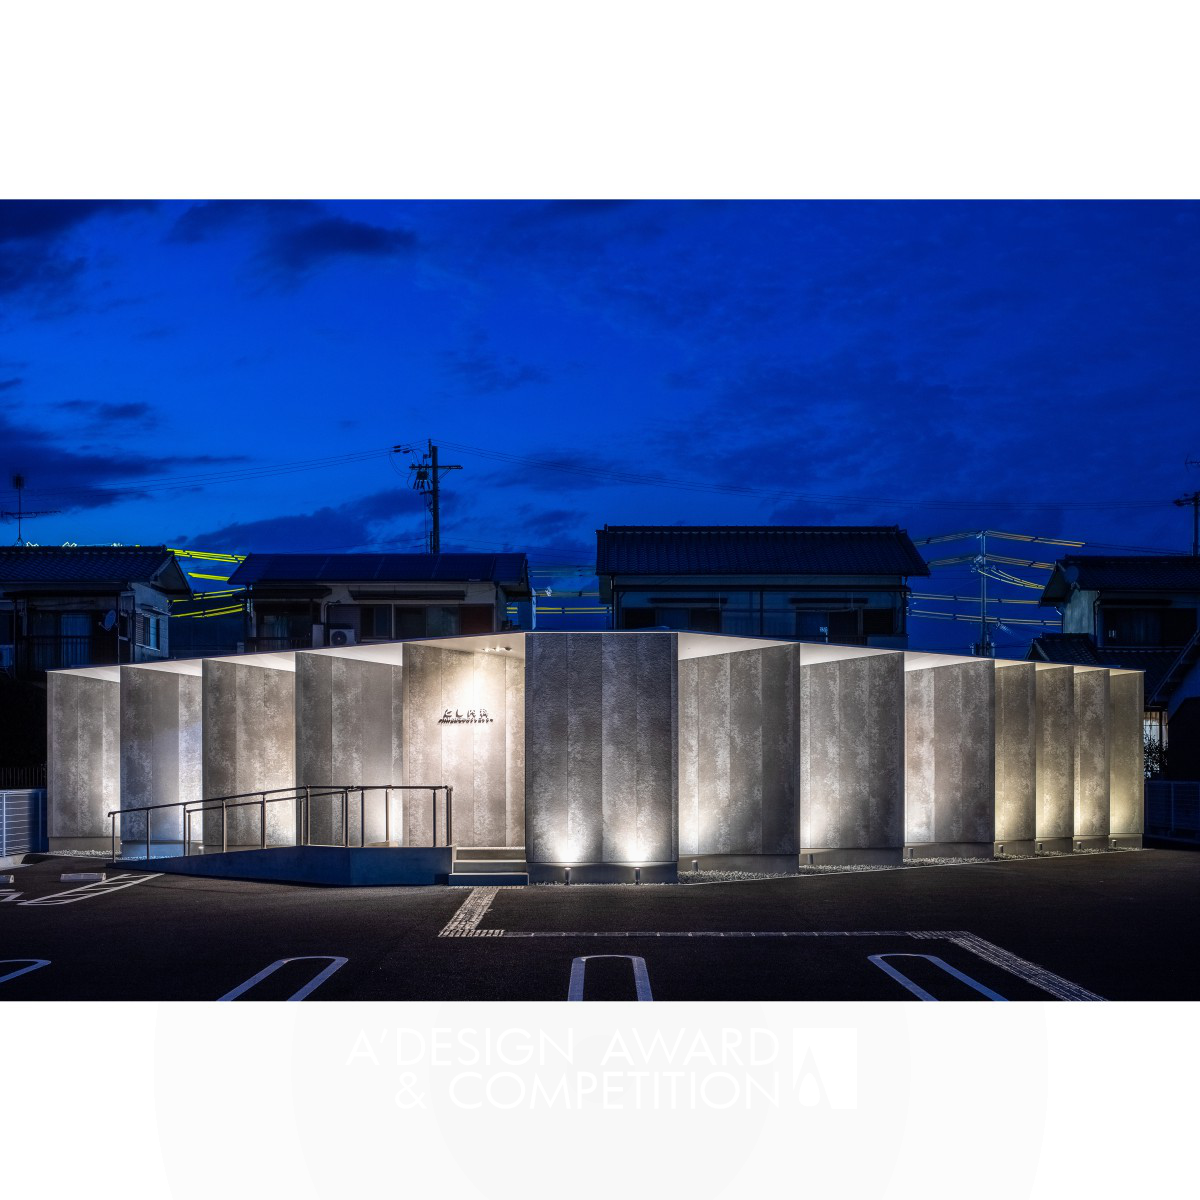 The OmniDirectional Internal Medicine Clinic by Tetsuya Matsumoto Silver Architecture, Building and Structure Design Award Winner 2021 